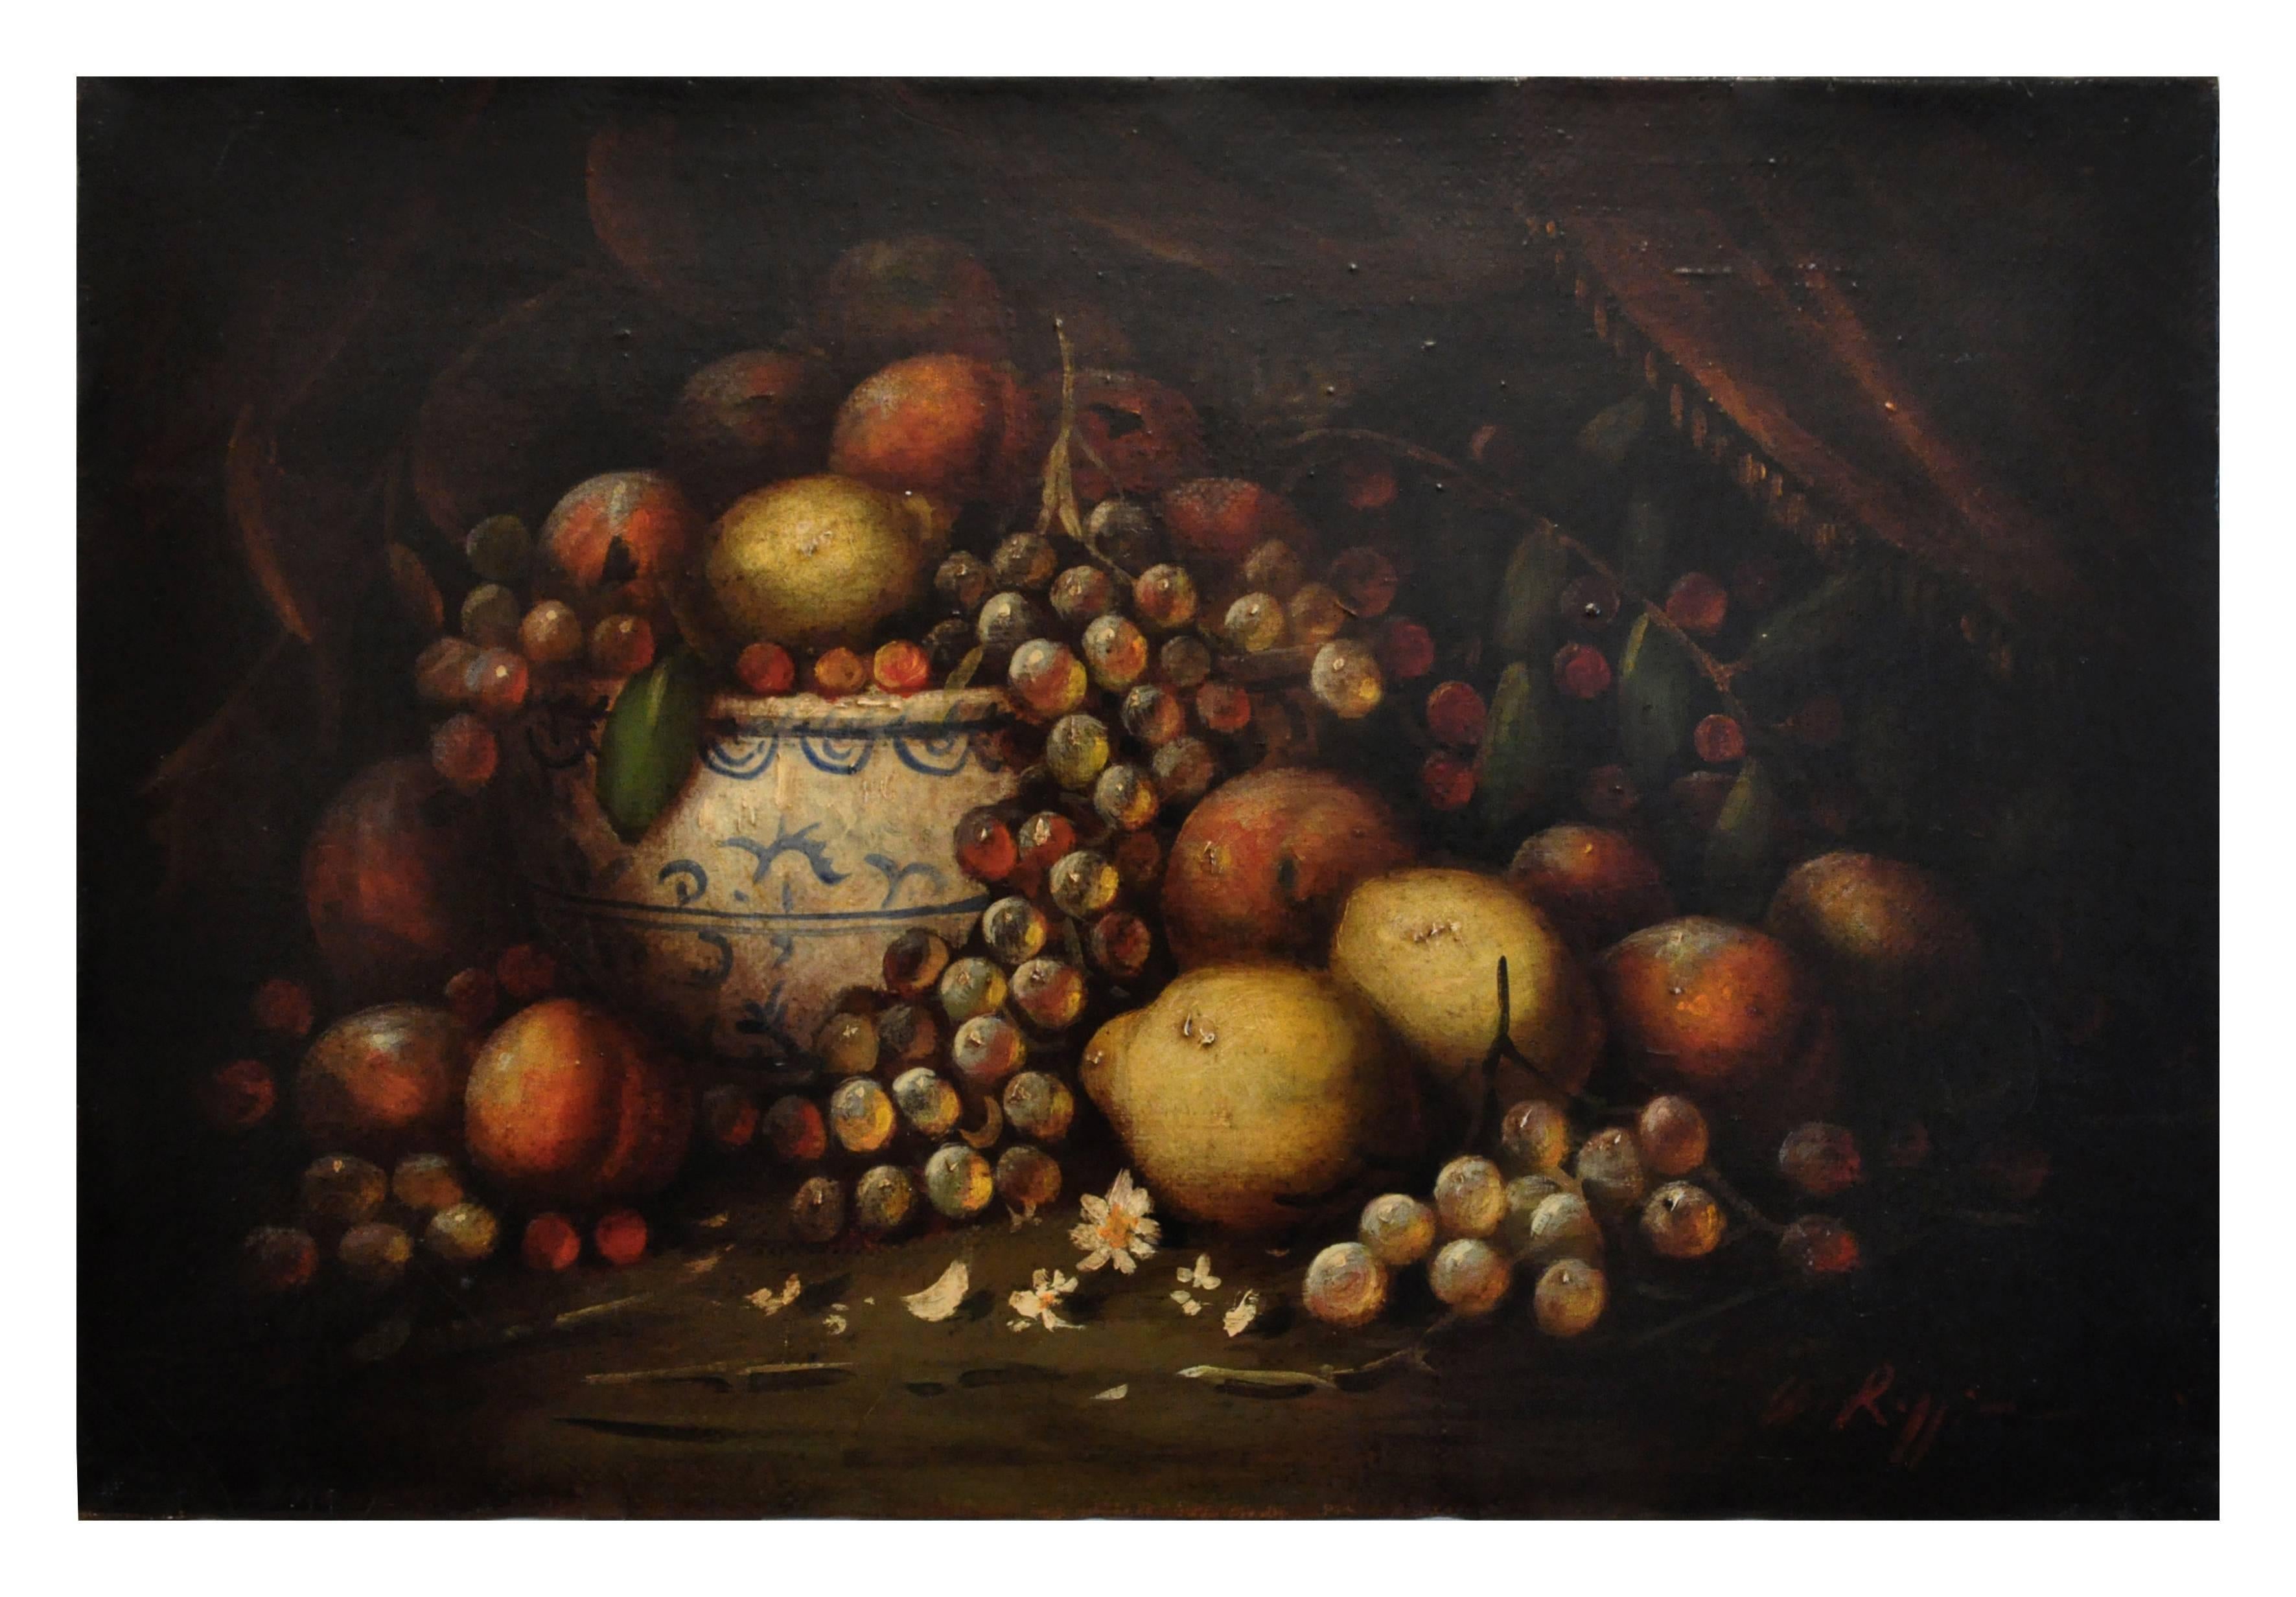 Still life - Massimo Reggiani Italia 2002 - Oil on canvas cm.40x60.
The origins of still life can be found in Dutch painting. Reggiani composed this still life inspired by the Dutch school. The composition of fruit in the painting is rich and